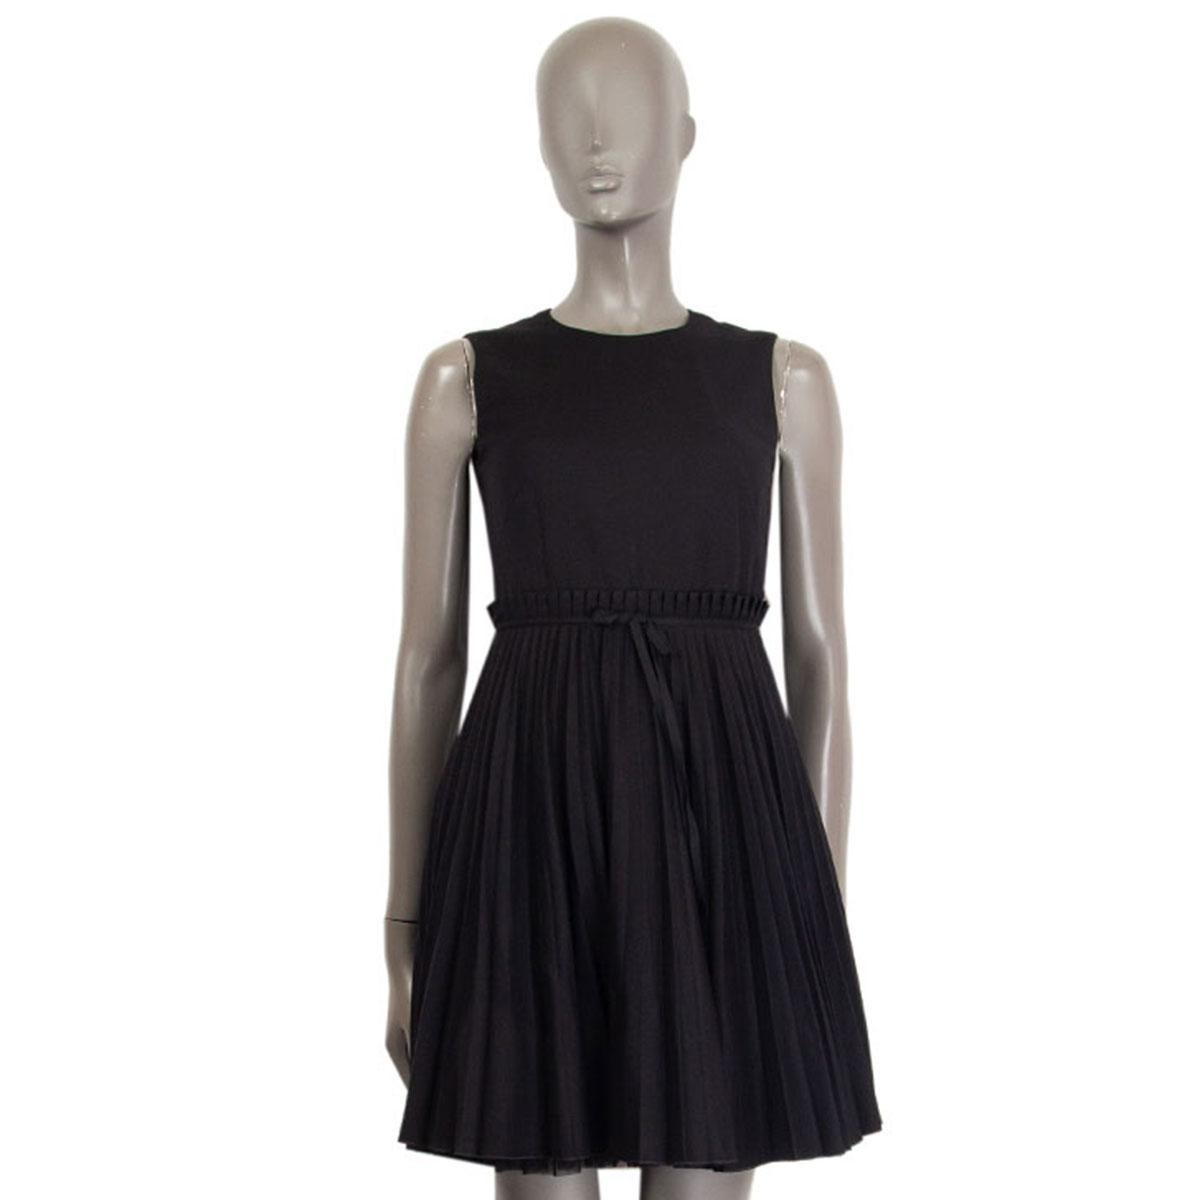 100% authentic R.E.D by Valentino sleeveless dress in black cotton (48%), viscose (30%), virgin wool (20%) and elastane (2%)  with plissé flared skirt and tulle underskirt and round neck-line. Closes with a concealed zipper on the back and has a bow